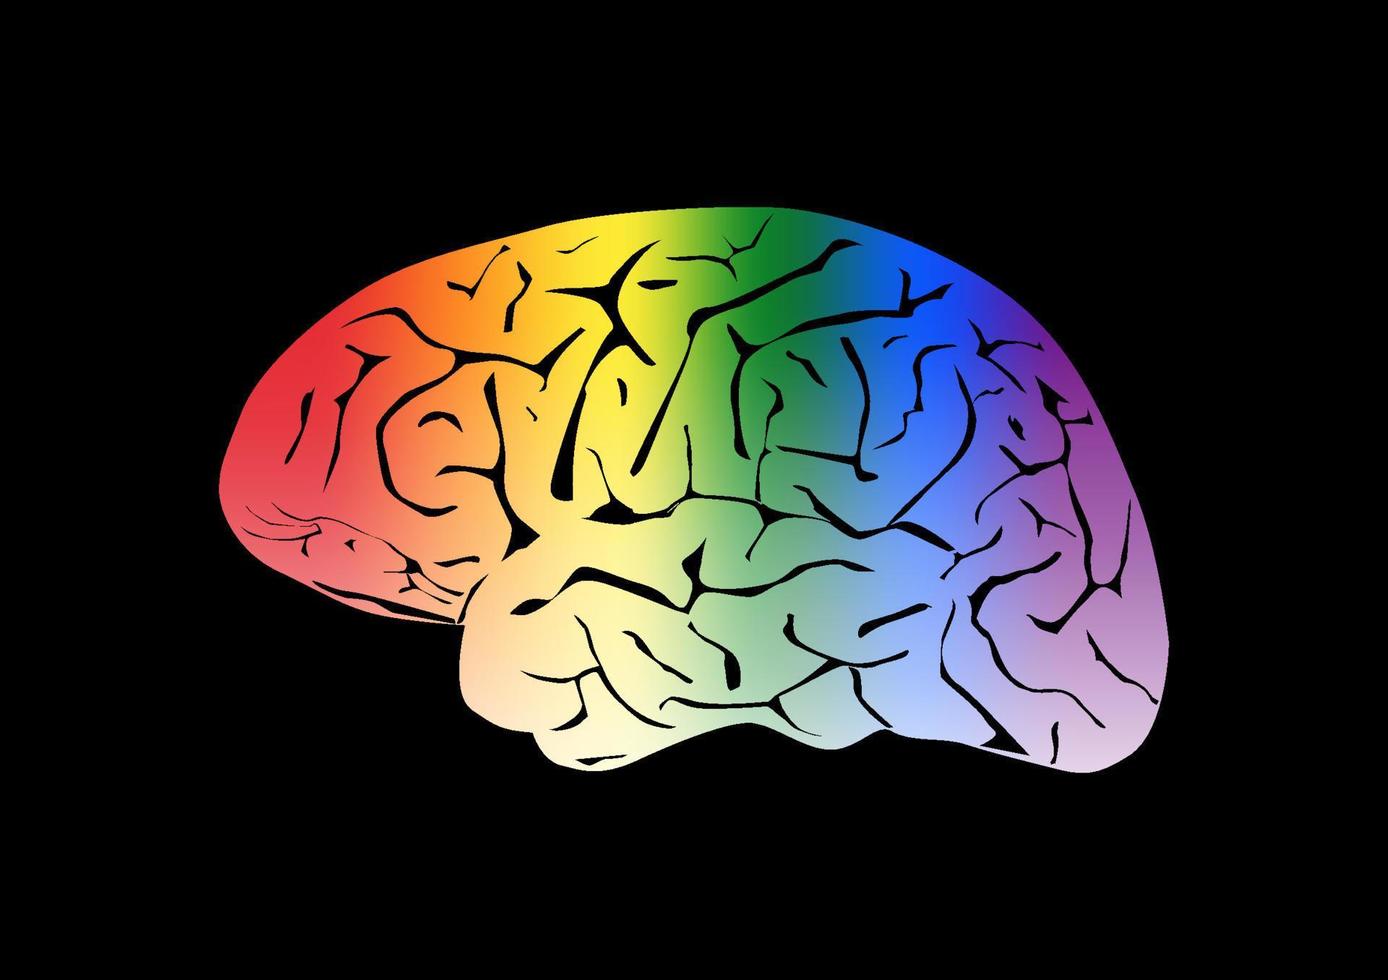 Human brain with rainbow colors on black background vector